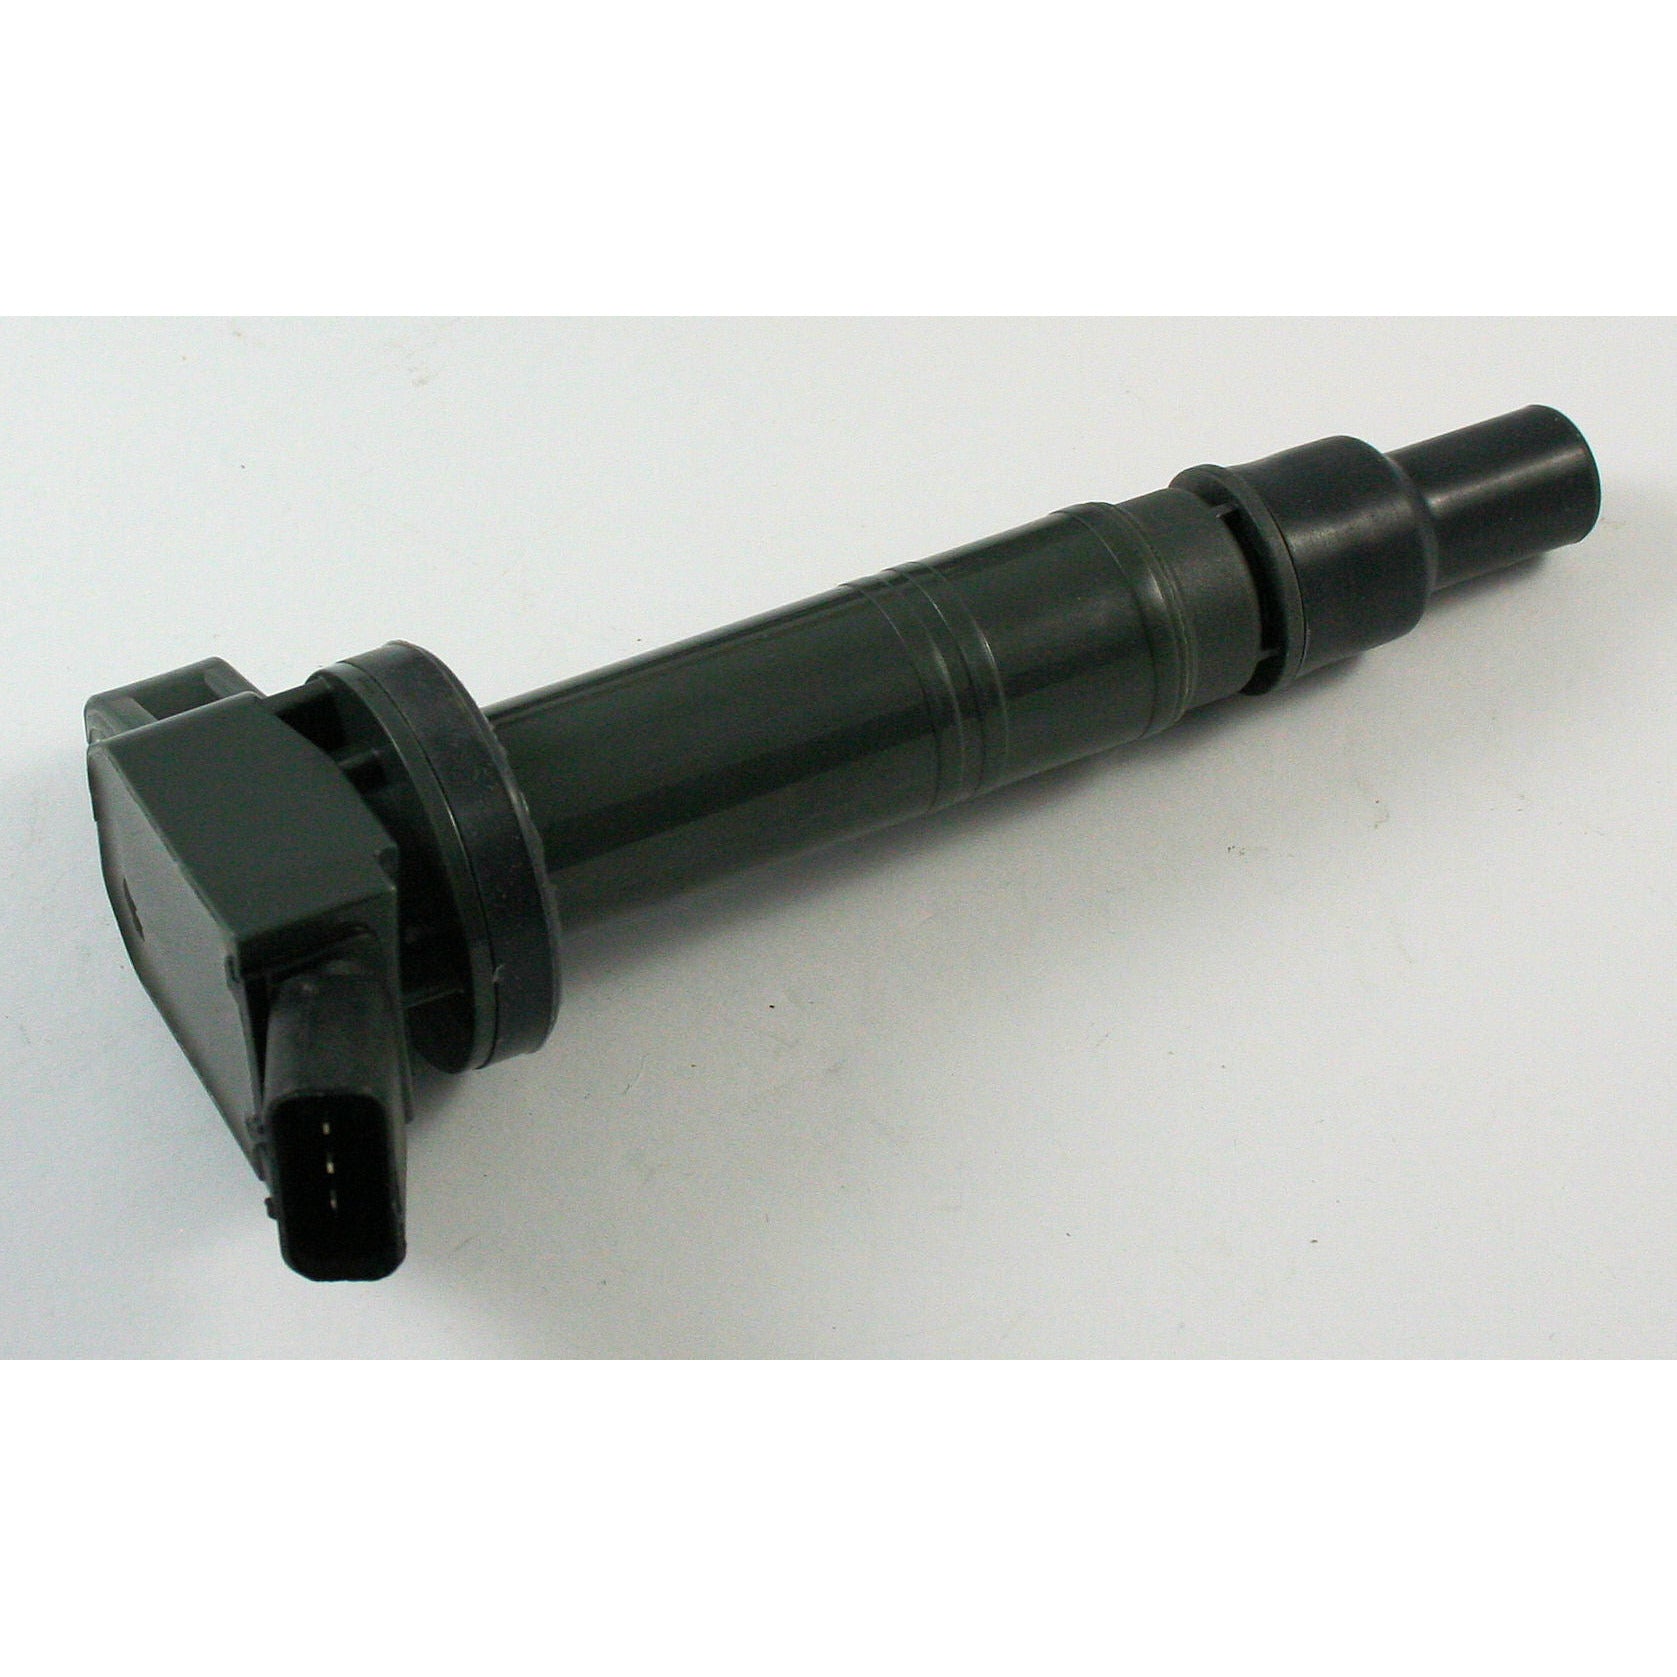 Goss Ignition Coil - [Suit Toyota] - C585